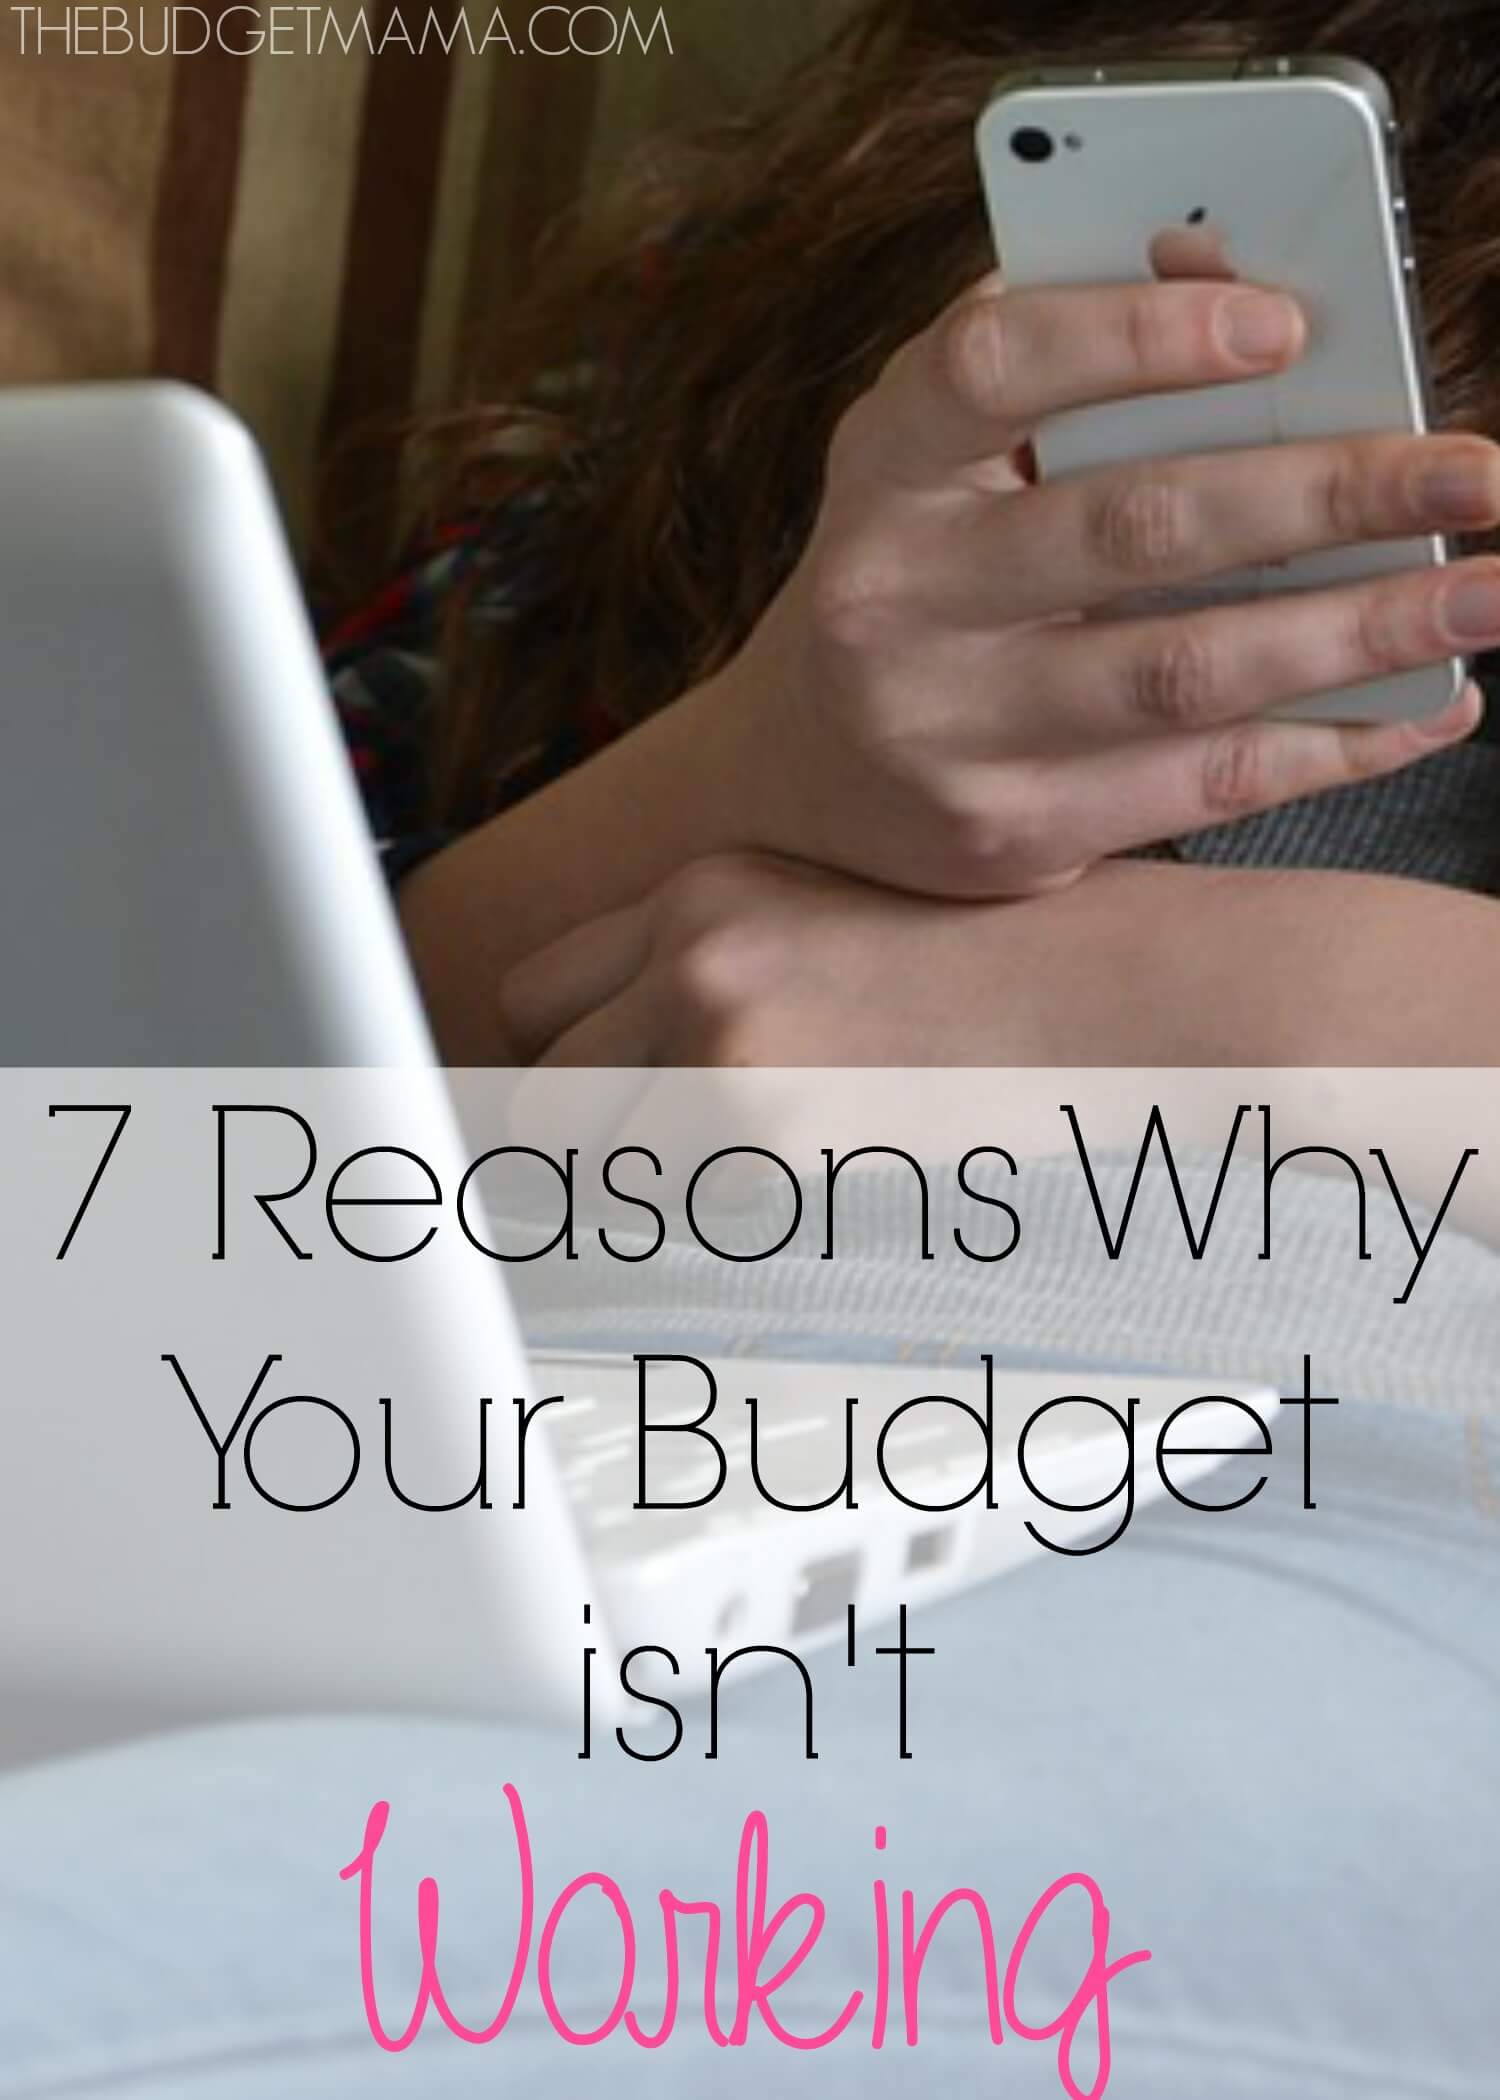 7 Reasons Why Your Budget is not Working